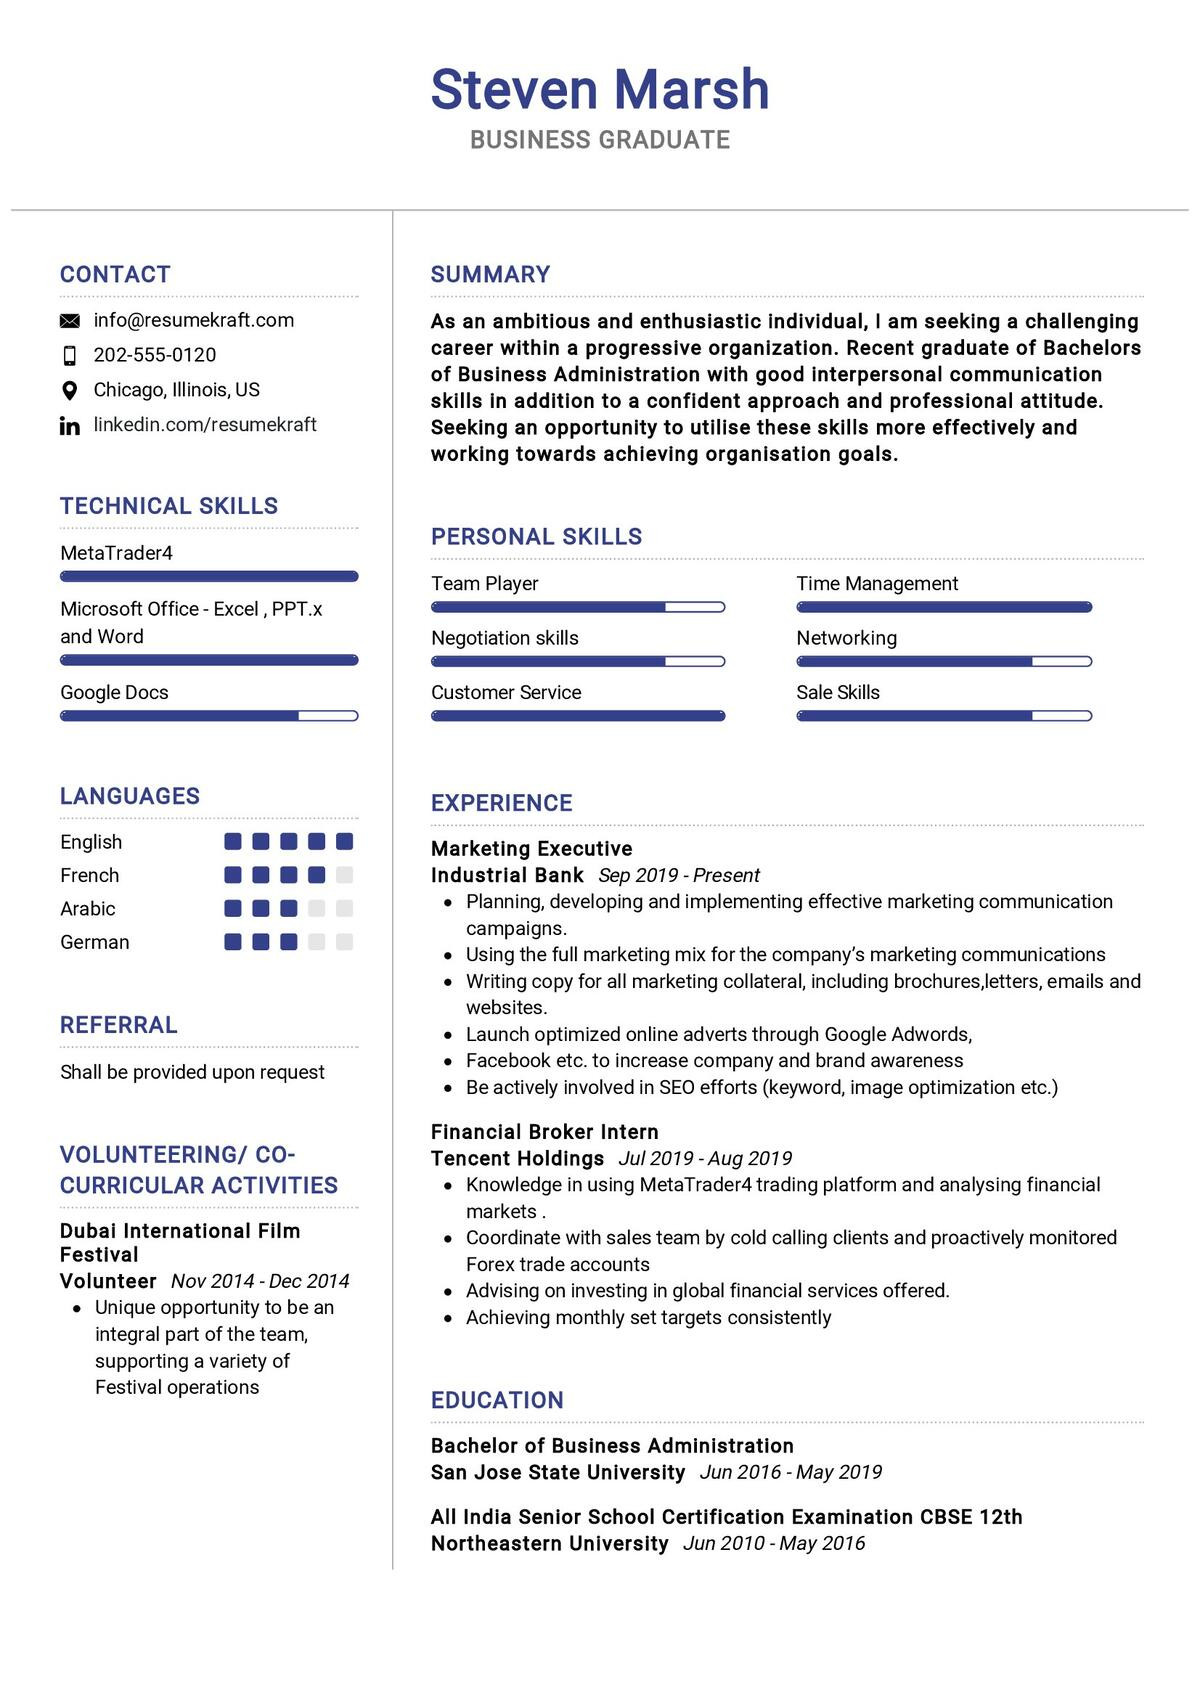 Resume Sample for Business Administration Student Business Graduate Resume Sample 2021 Writing Tips – Resumekraft